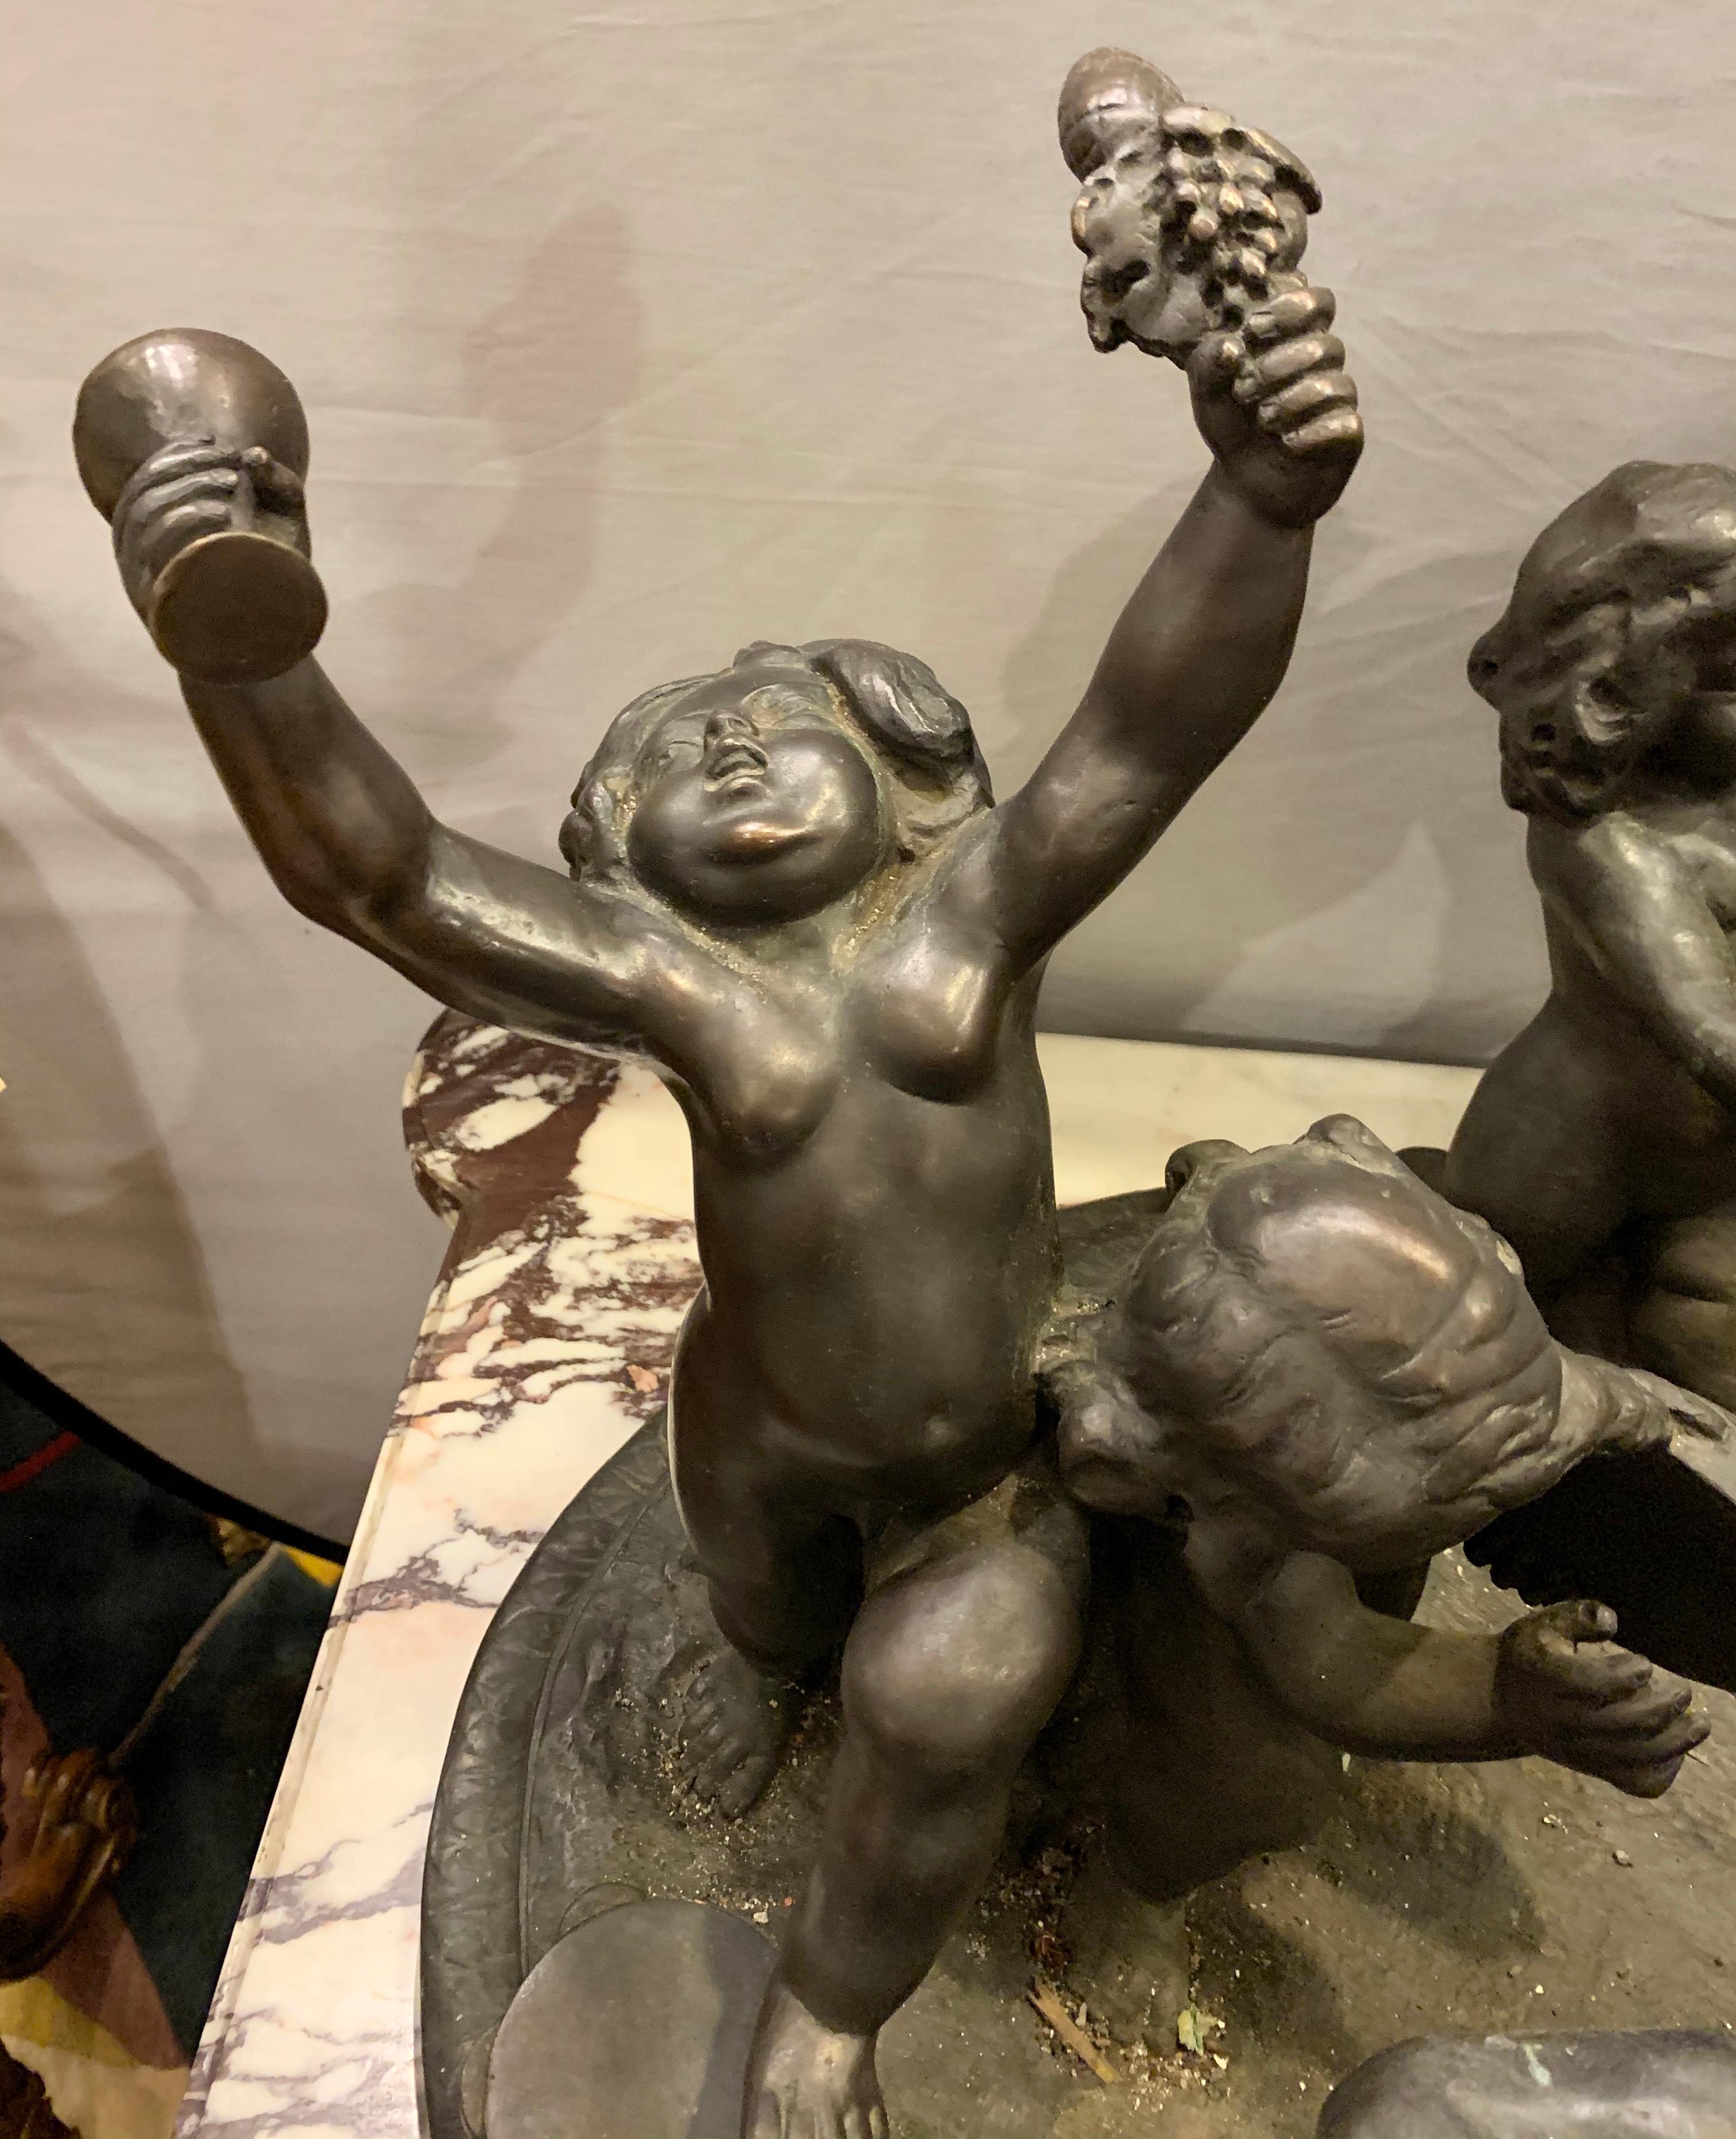 Antique bronze cherub group sculpture or centerpiece of drunken playing cherubs. This simply delightful grouping is large and impressive as it sits almost four feet wide and depicts many drunken cherubs playing on their donkeys and petting their